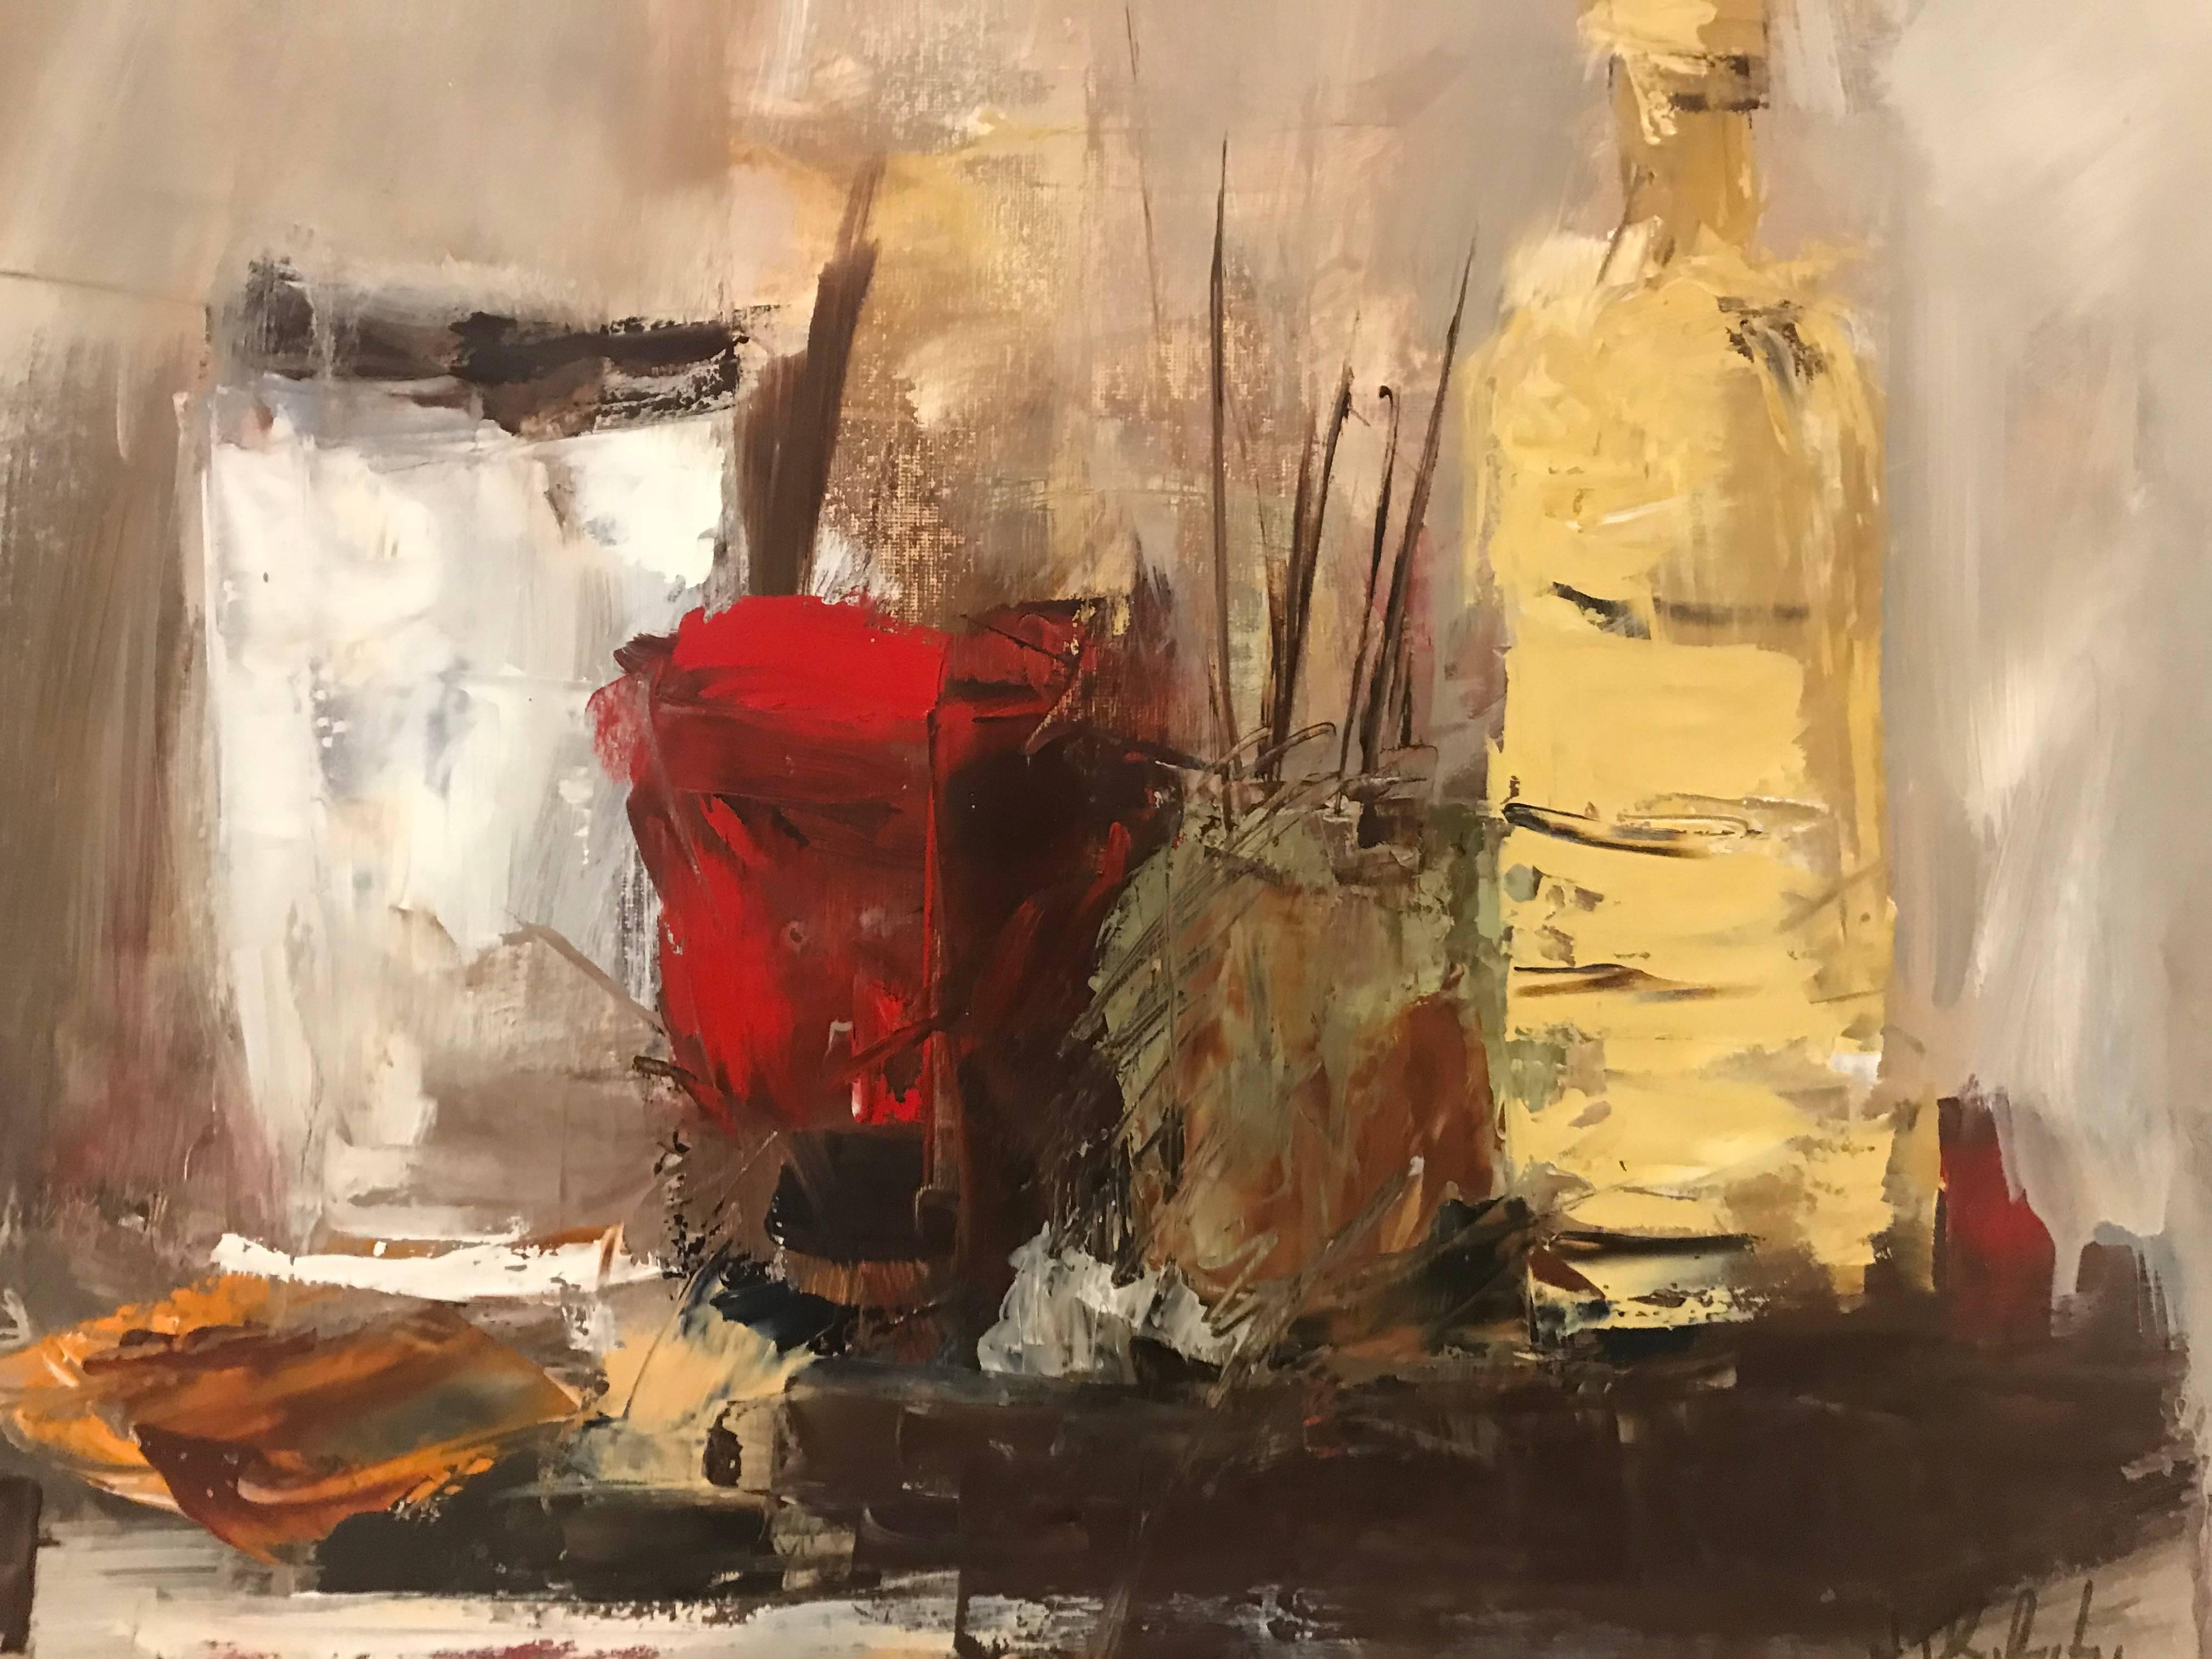 'Still Life with Painter's Quills' is an abstract Impressionist still-life painting created by French artist Andrée Thobaty in 2018. Painted in an almost square format, this oil on canvas painting features a still-life whose treatment leans towards